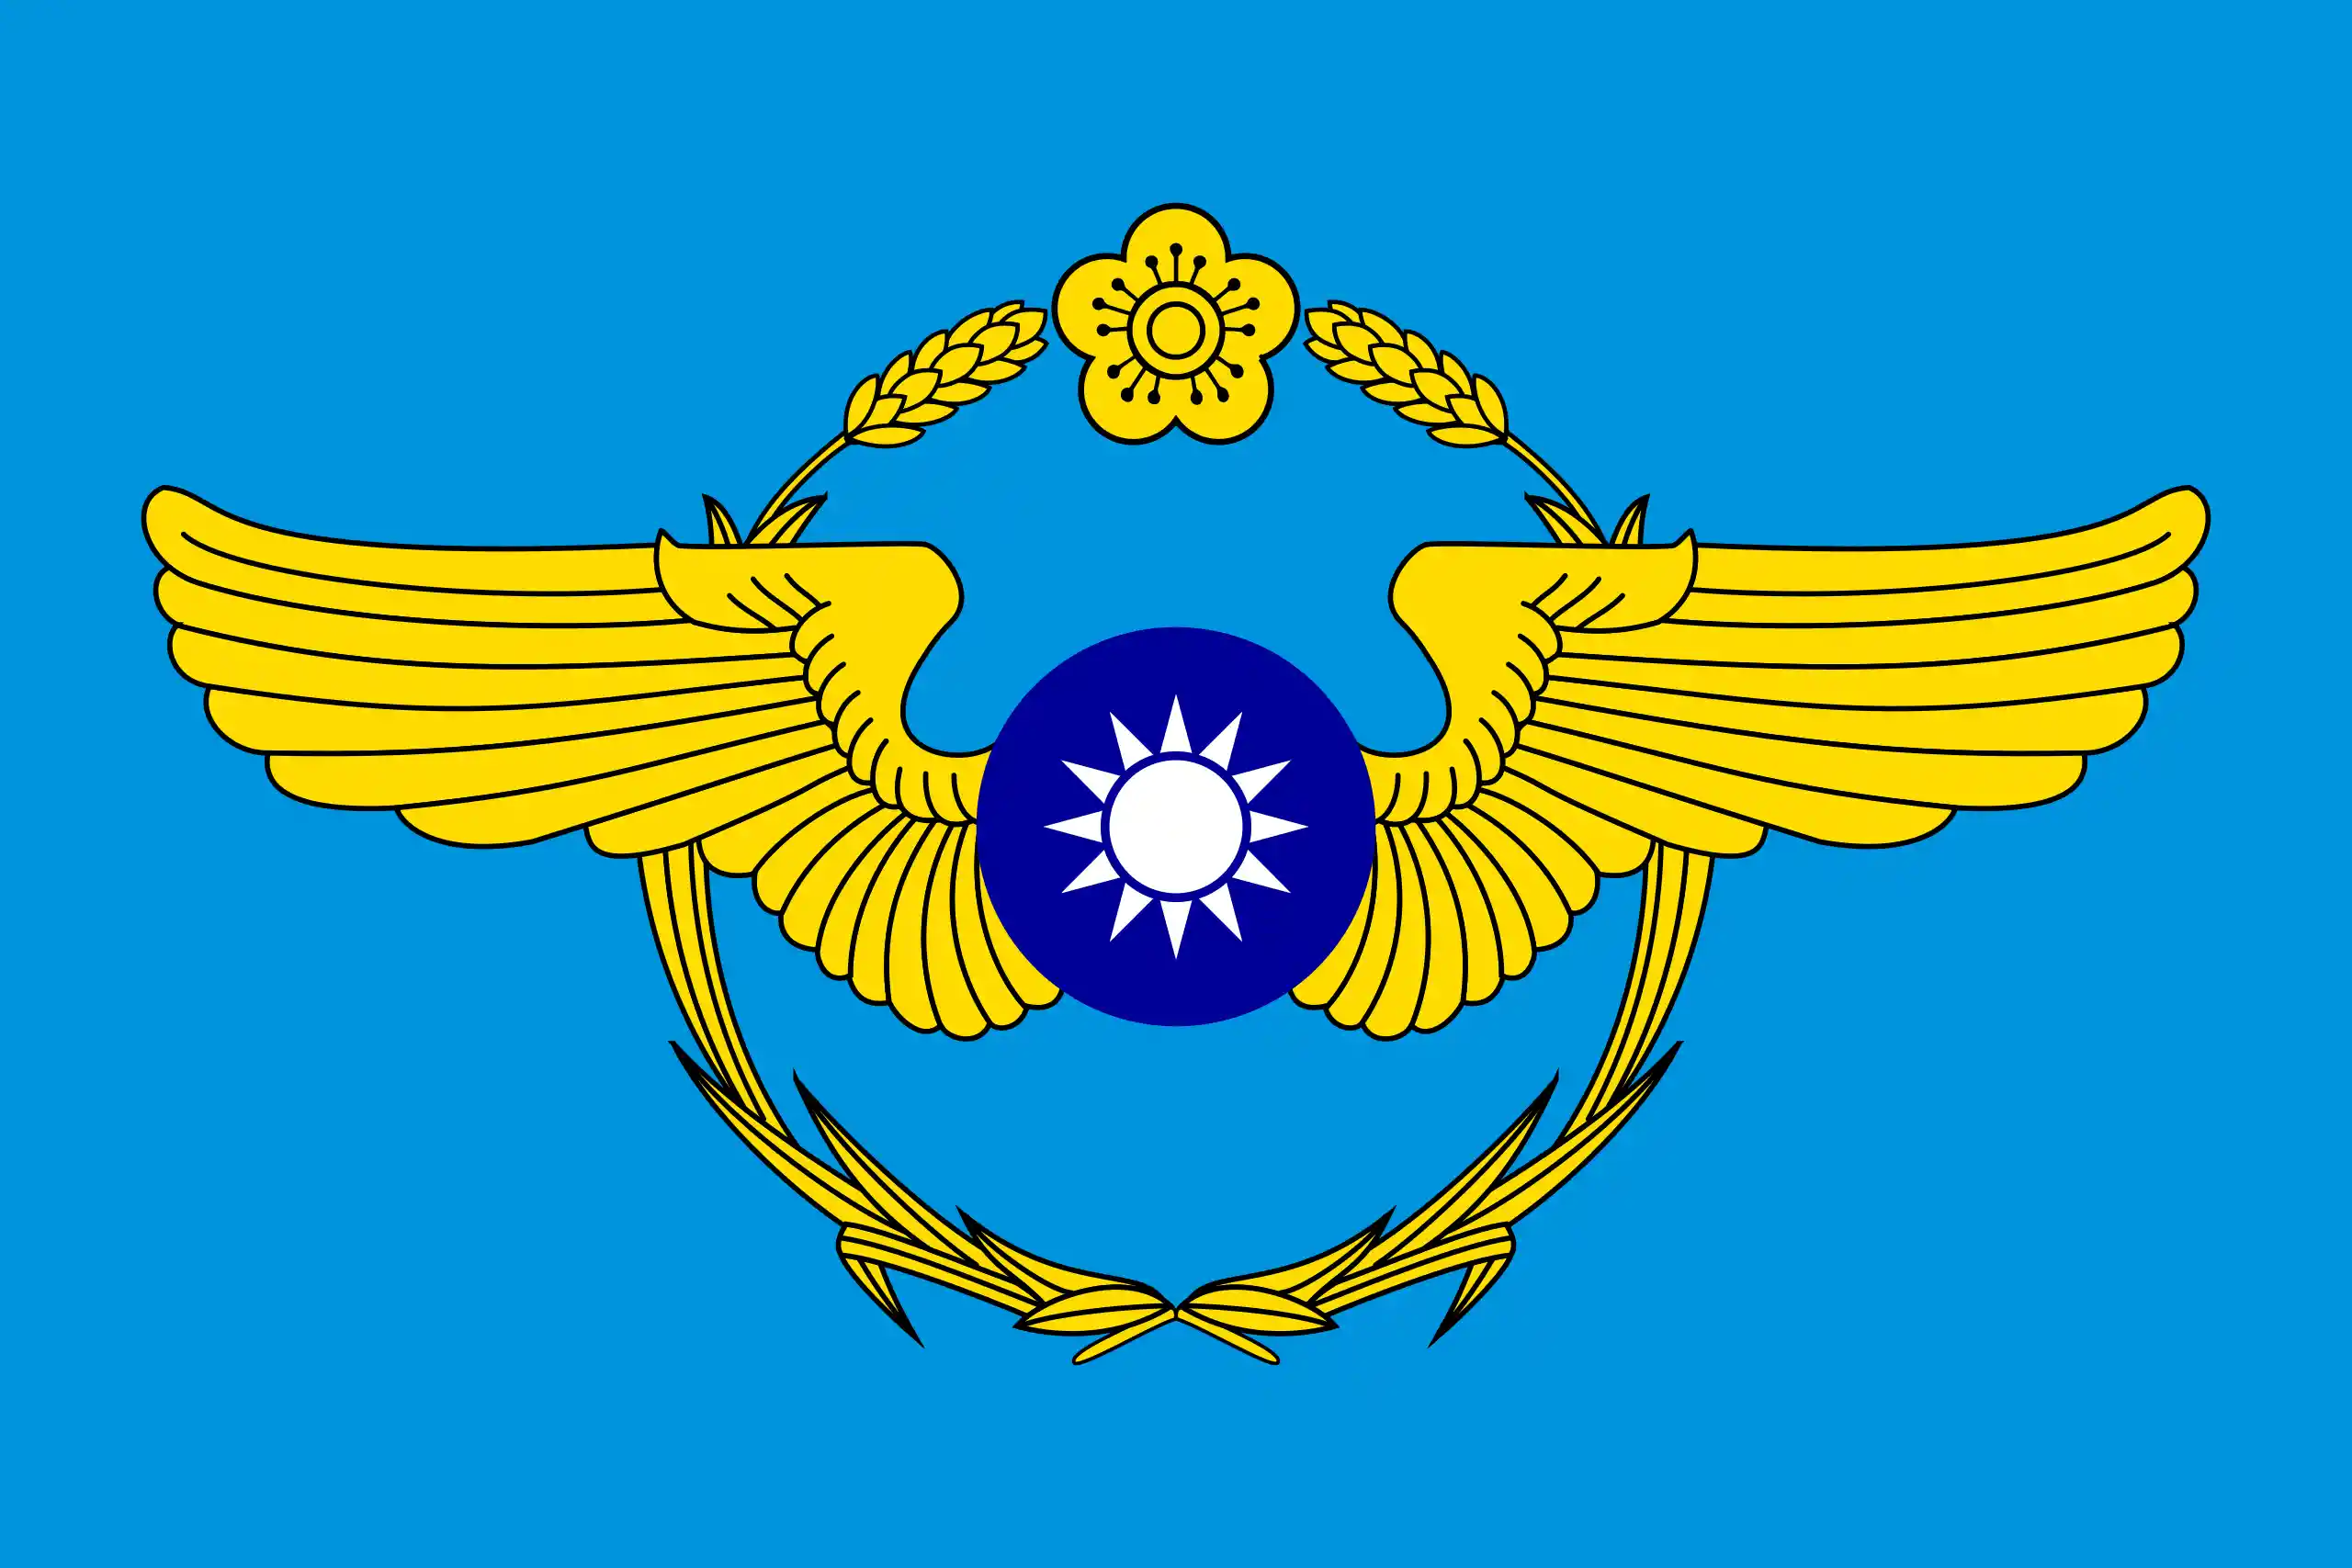 Republic_of_China_Air_Forces_Flag_(1948).svg.png